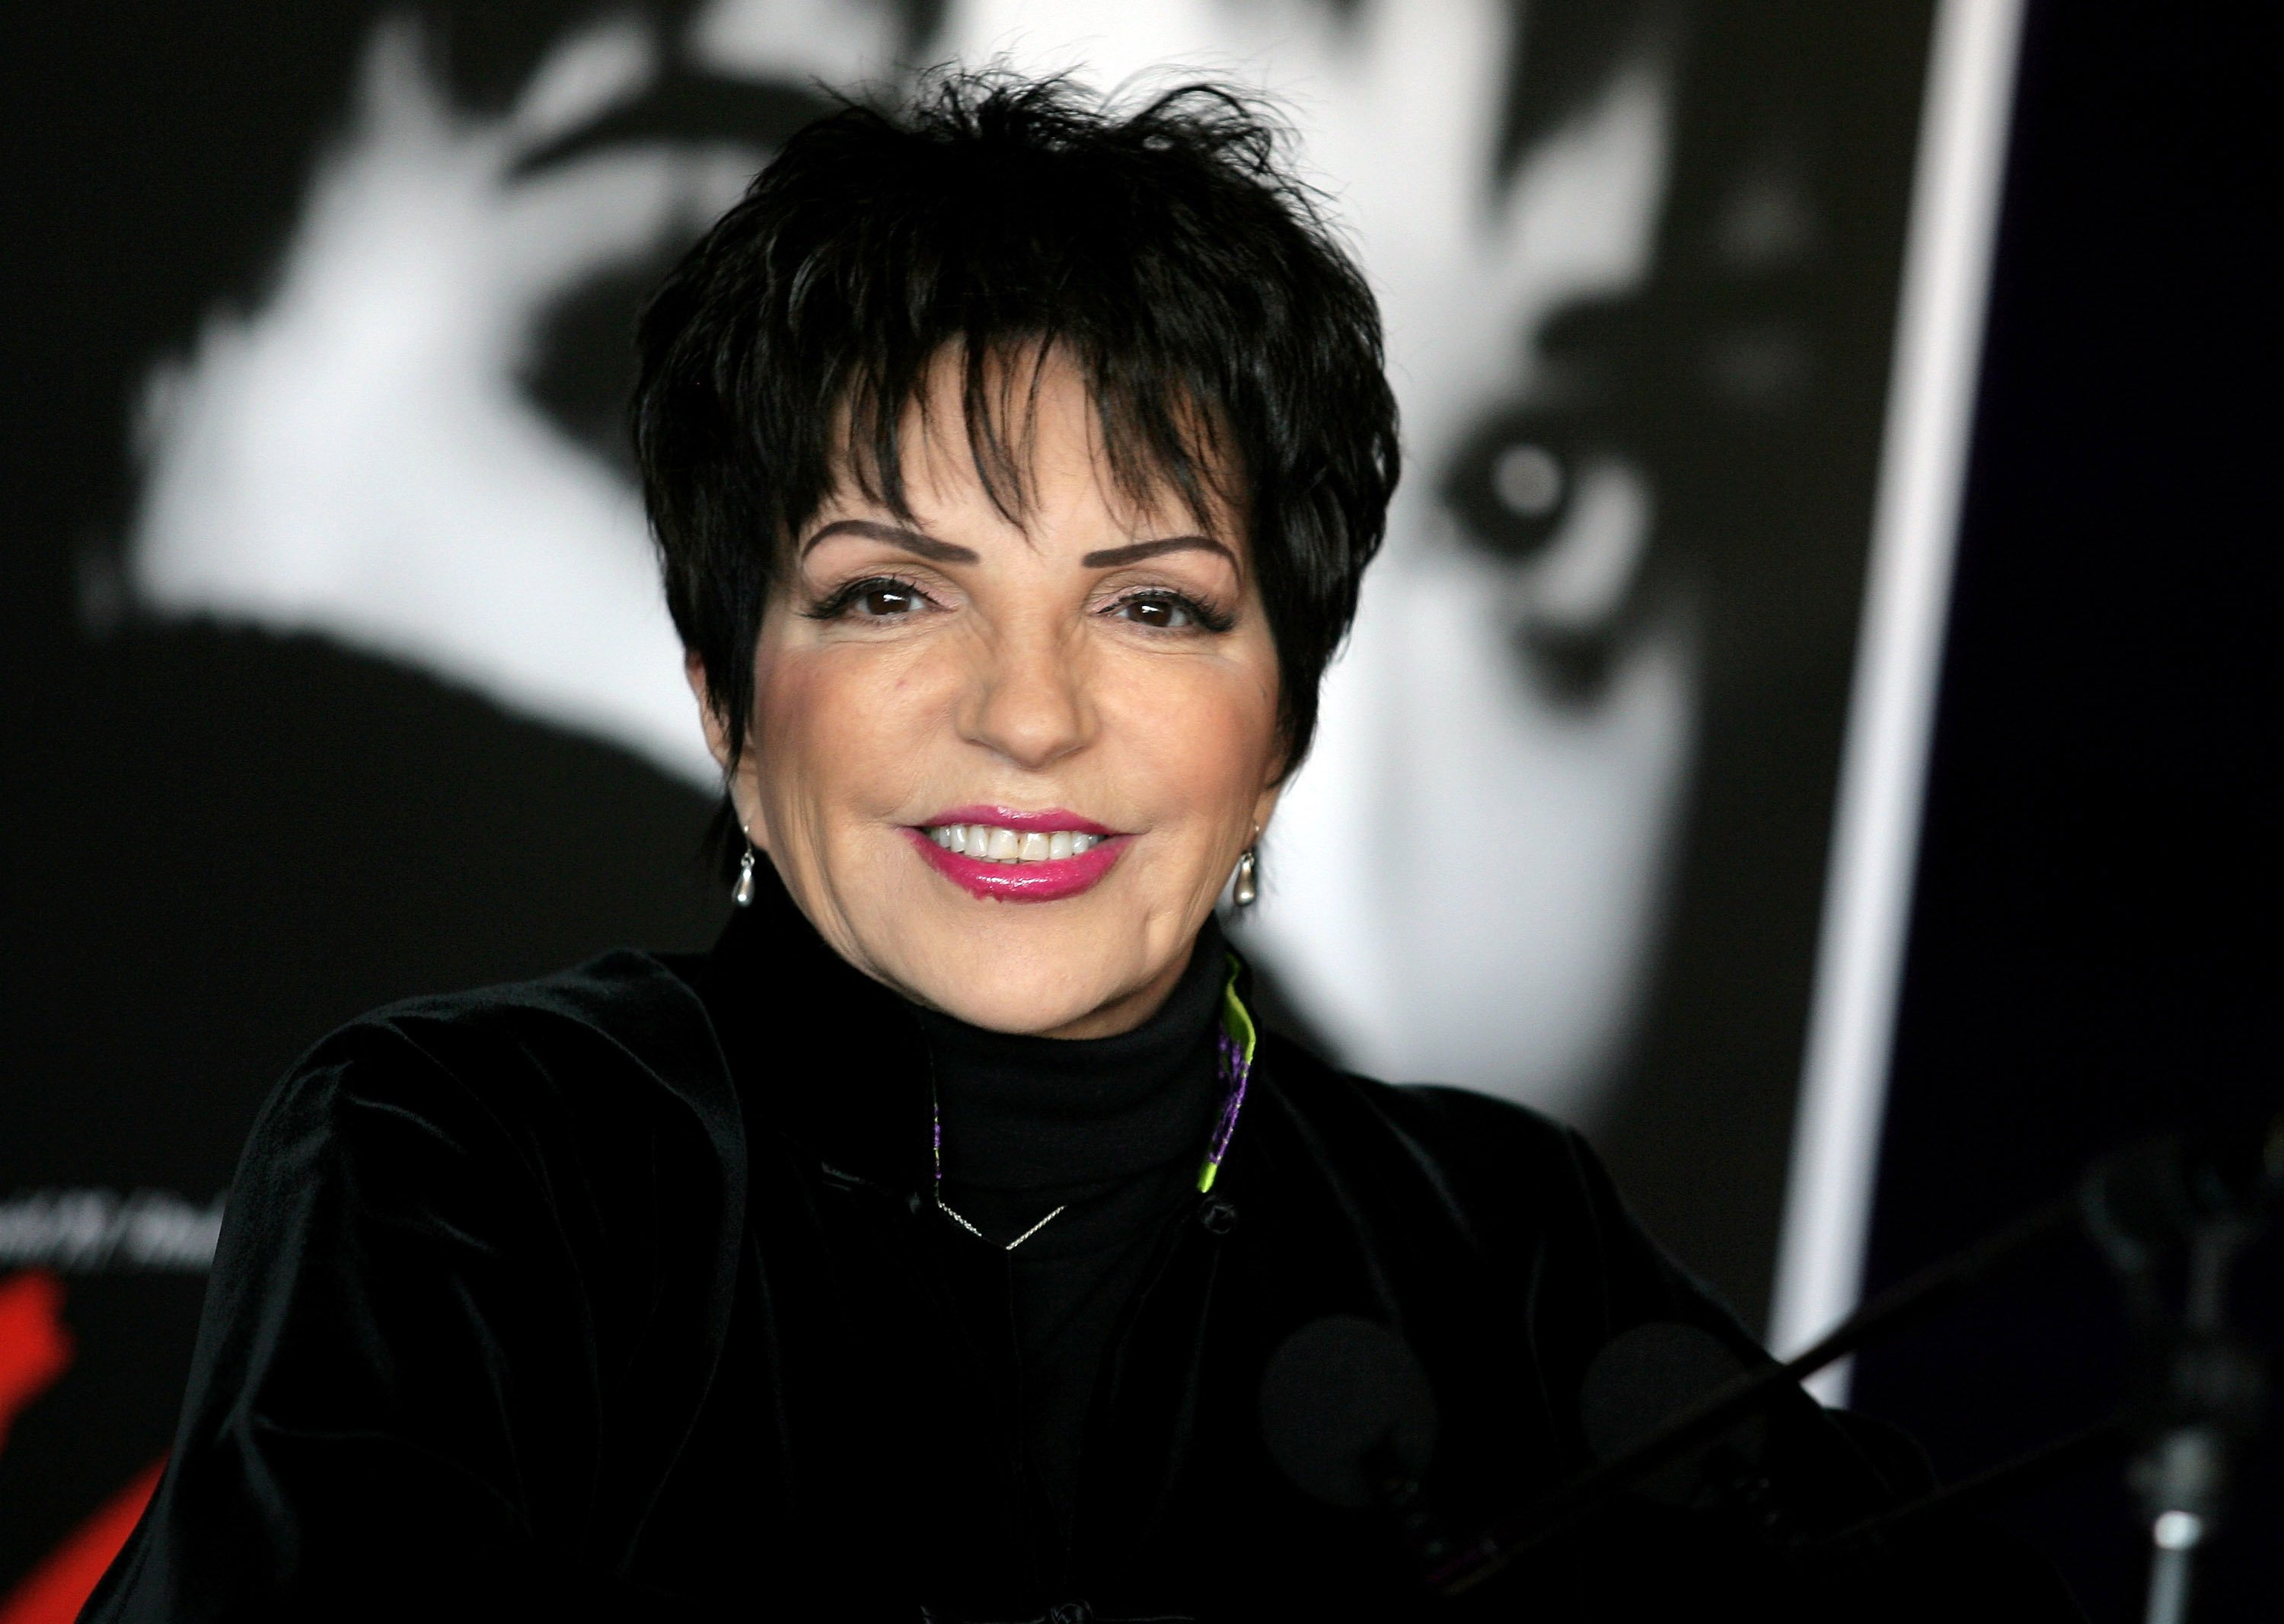 Liza Minnelli wears a black turtleneck and stands in front of a black and white background.